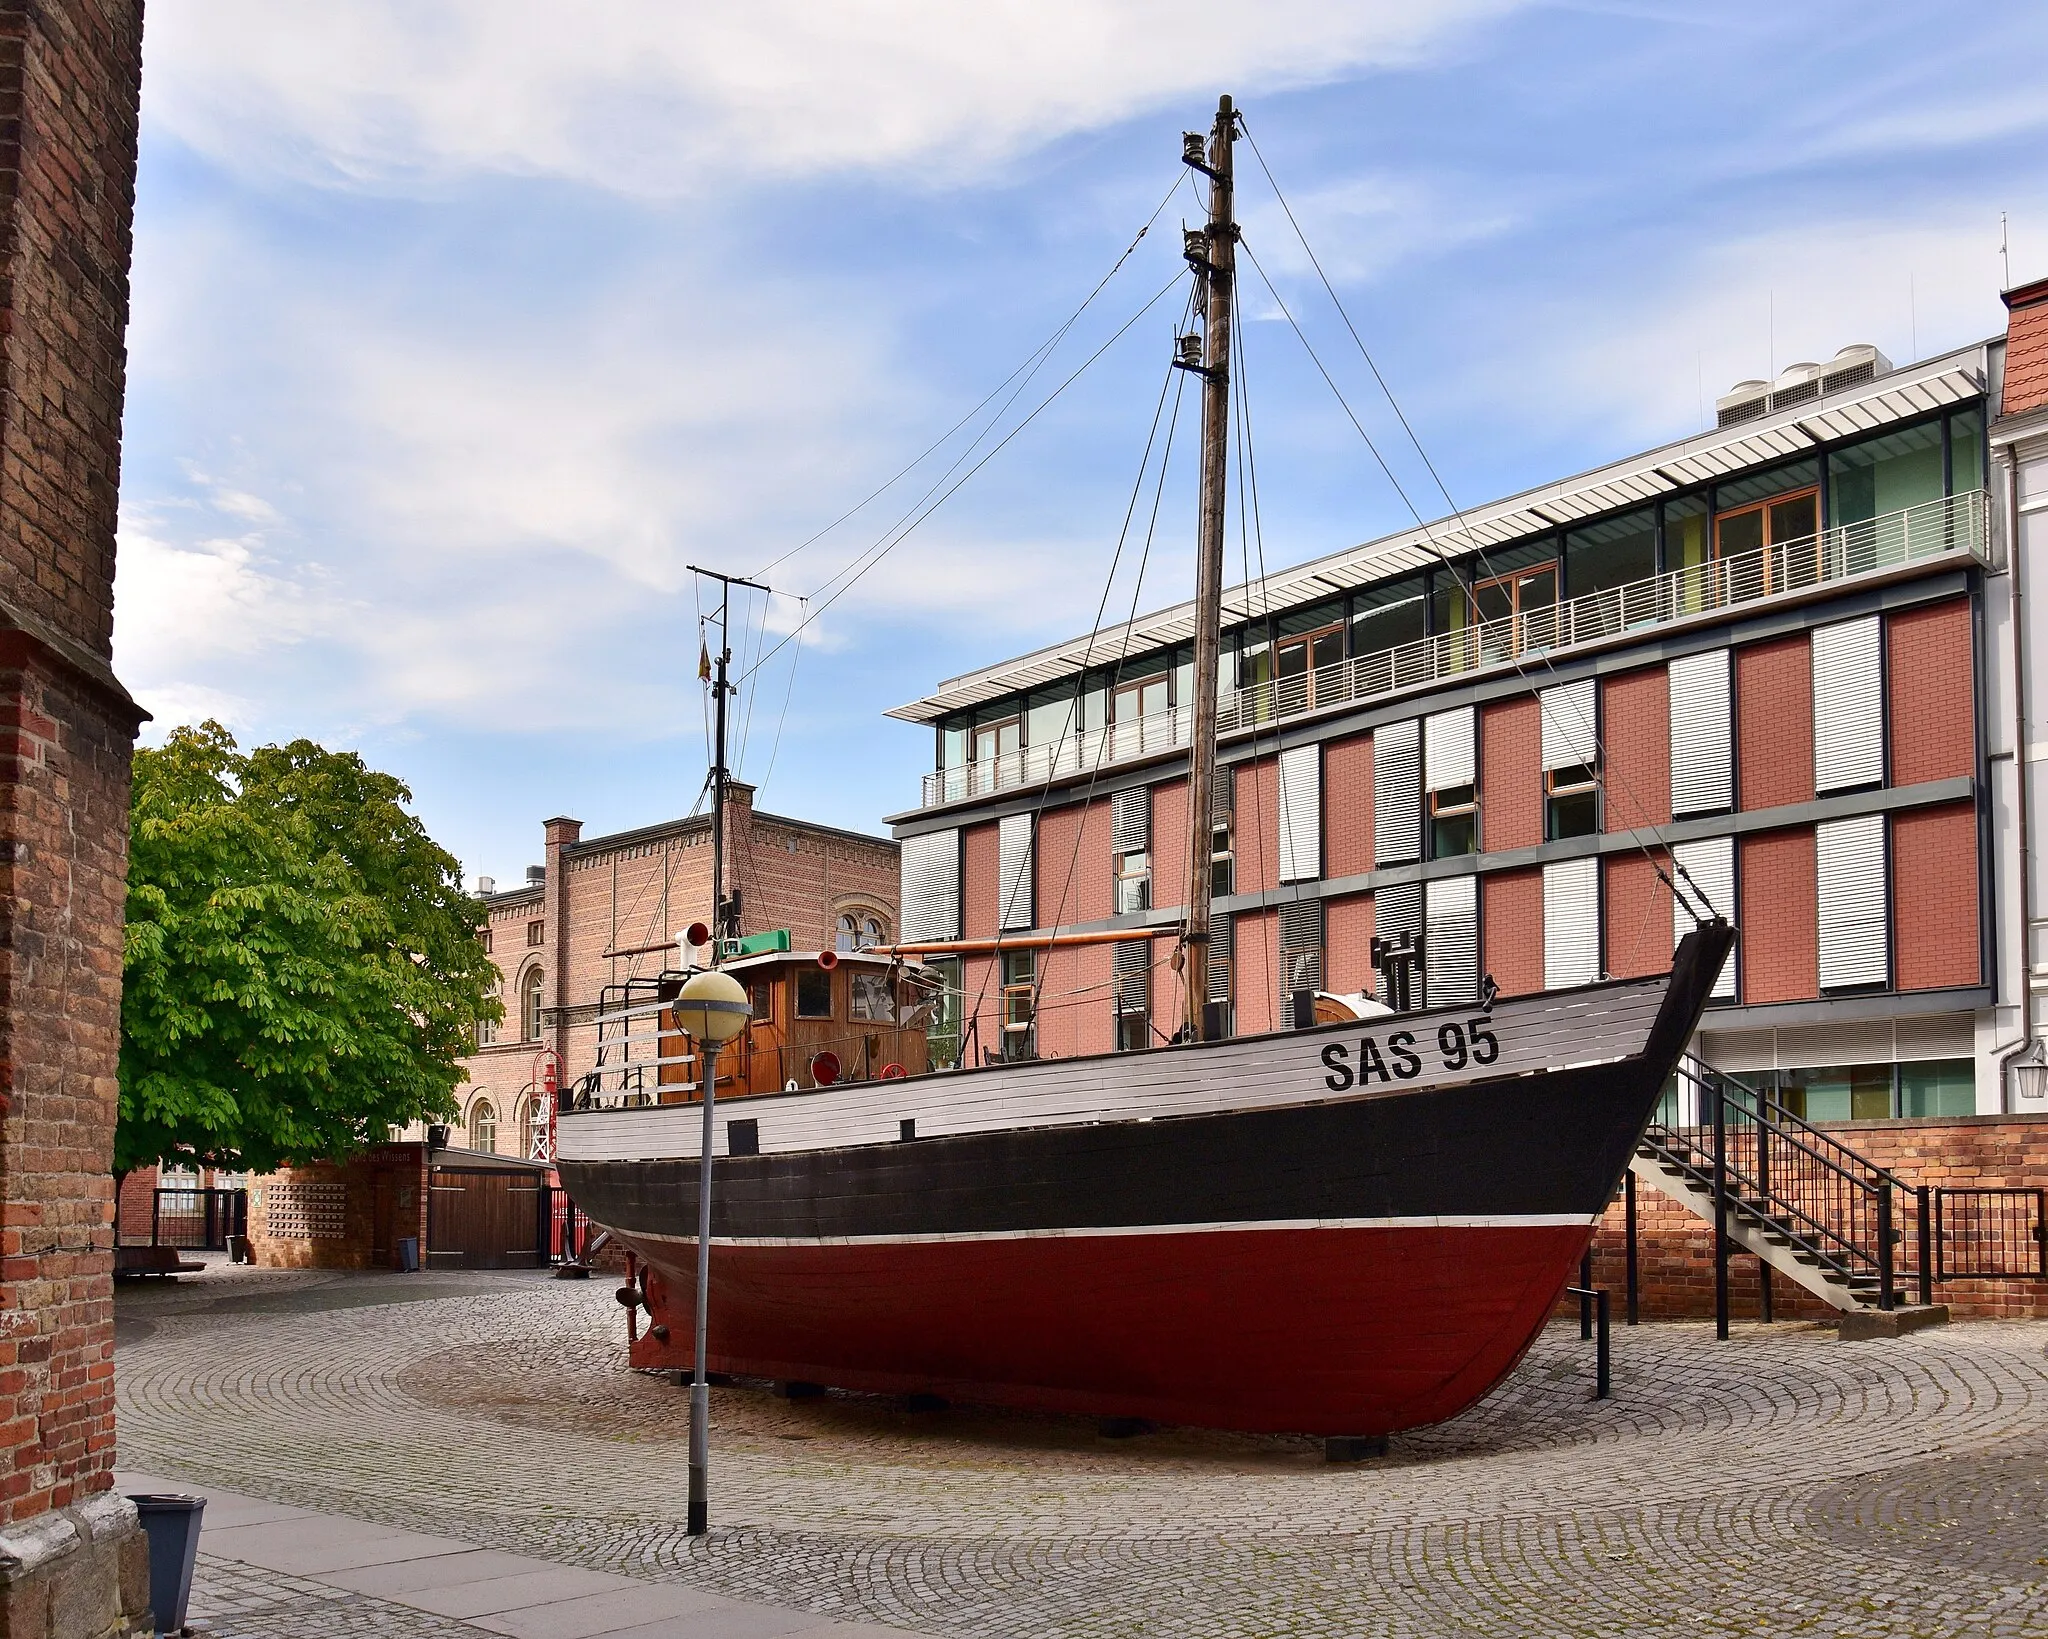 Photo showing: The former fishing boat Adolf Reichwein, on display at the German Oceanographic Museum, Stralsund, Germany